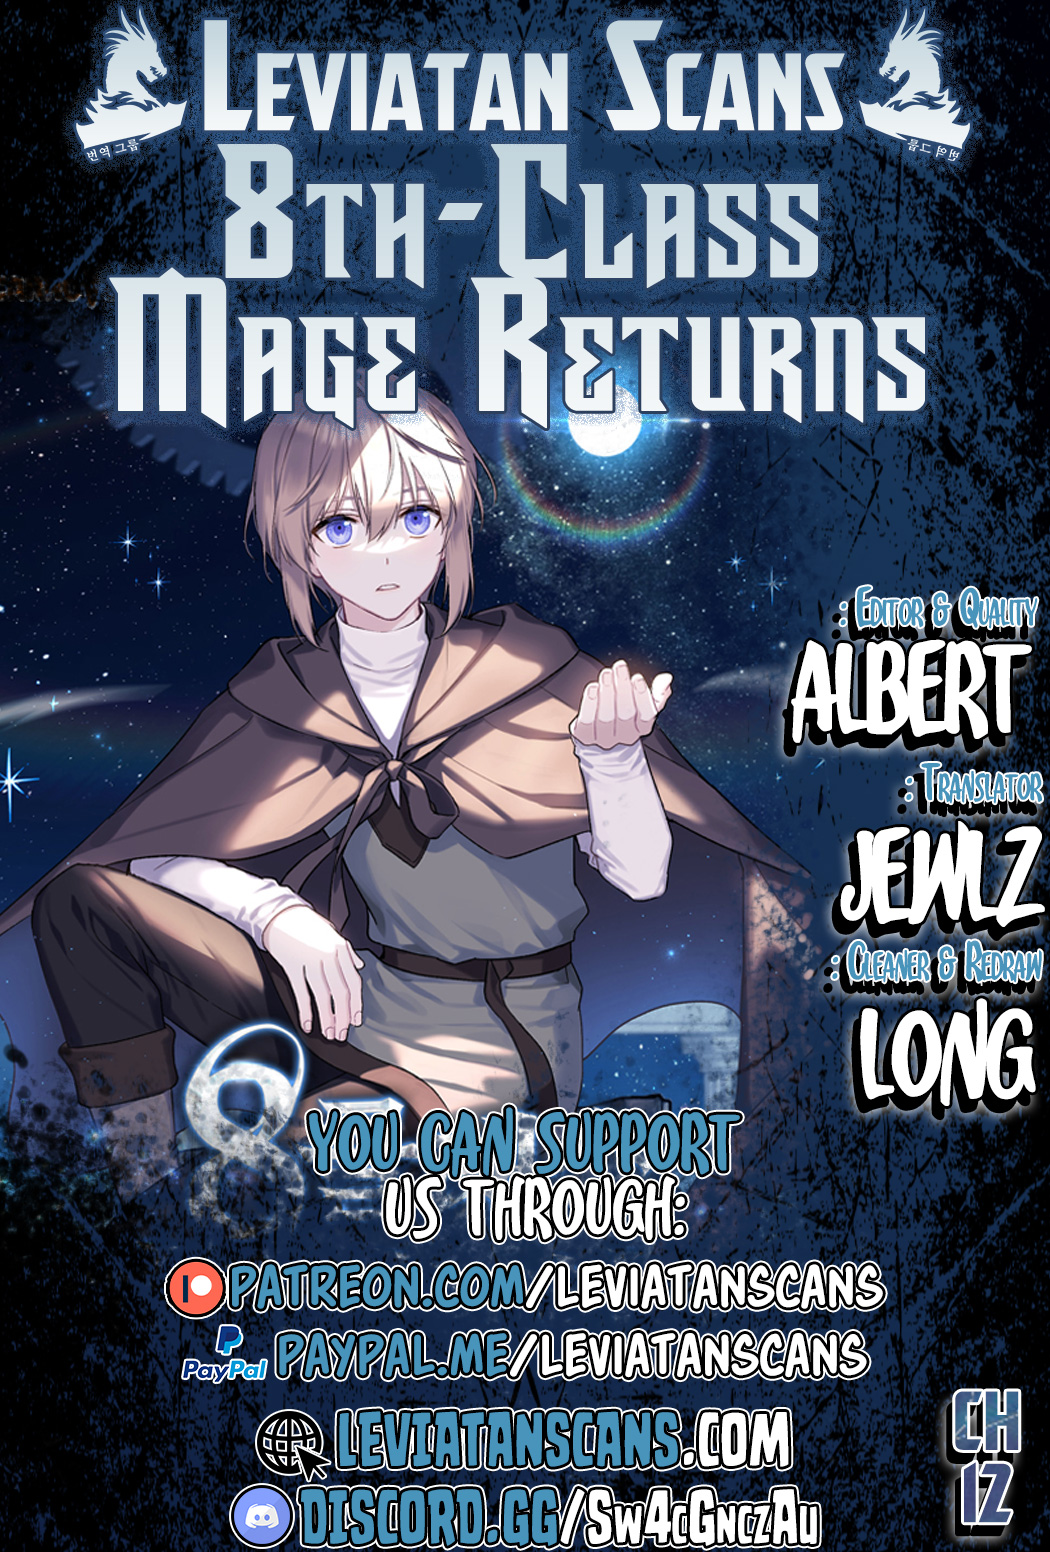 Return of the 8th Class Magician - Chapter 7131 - Image 1